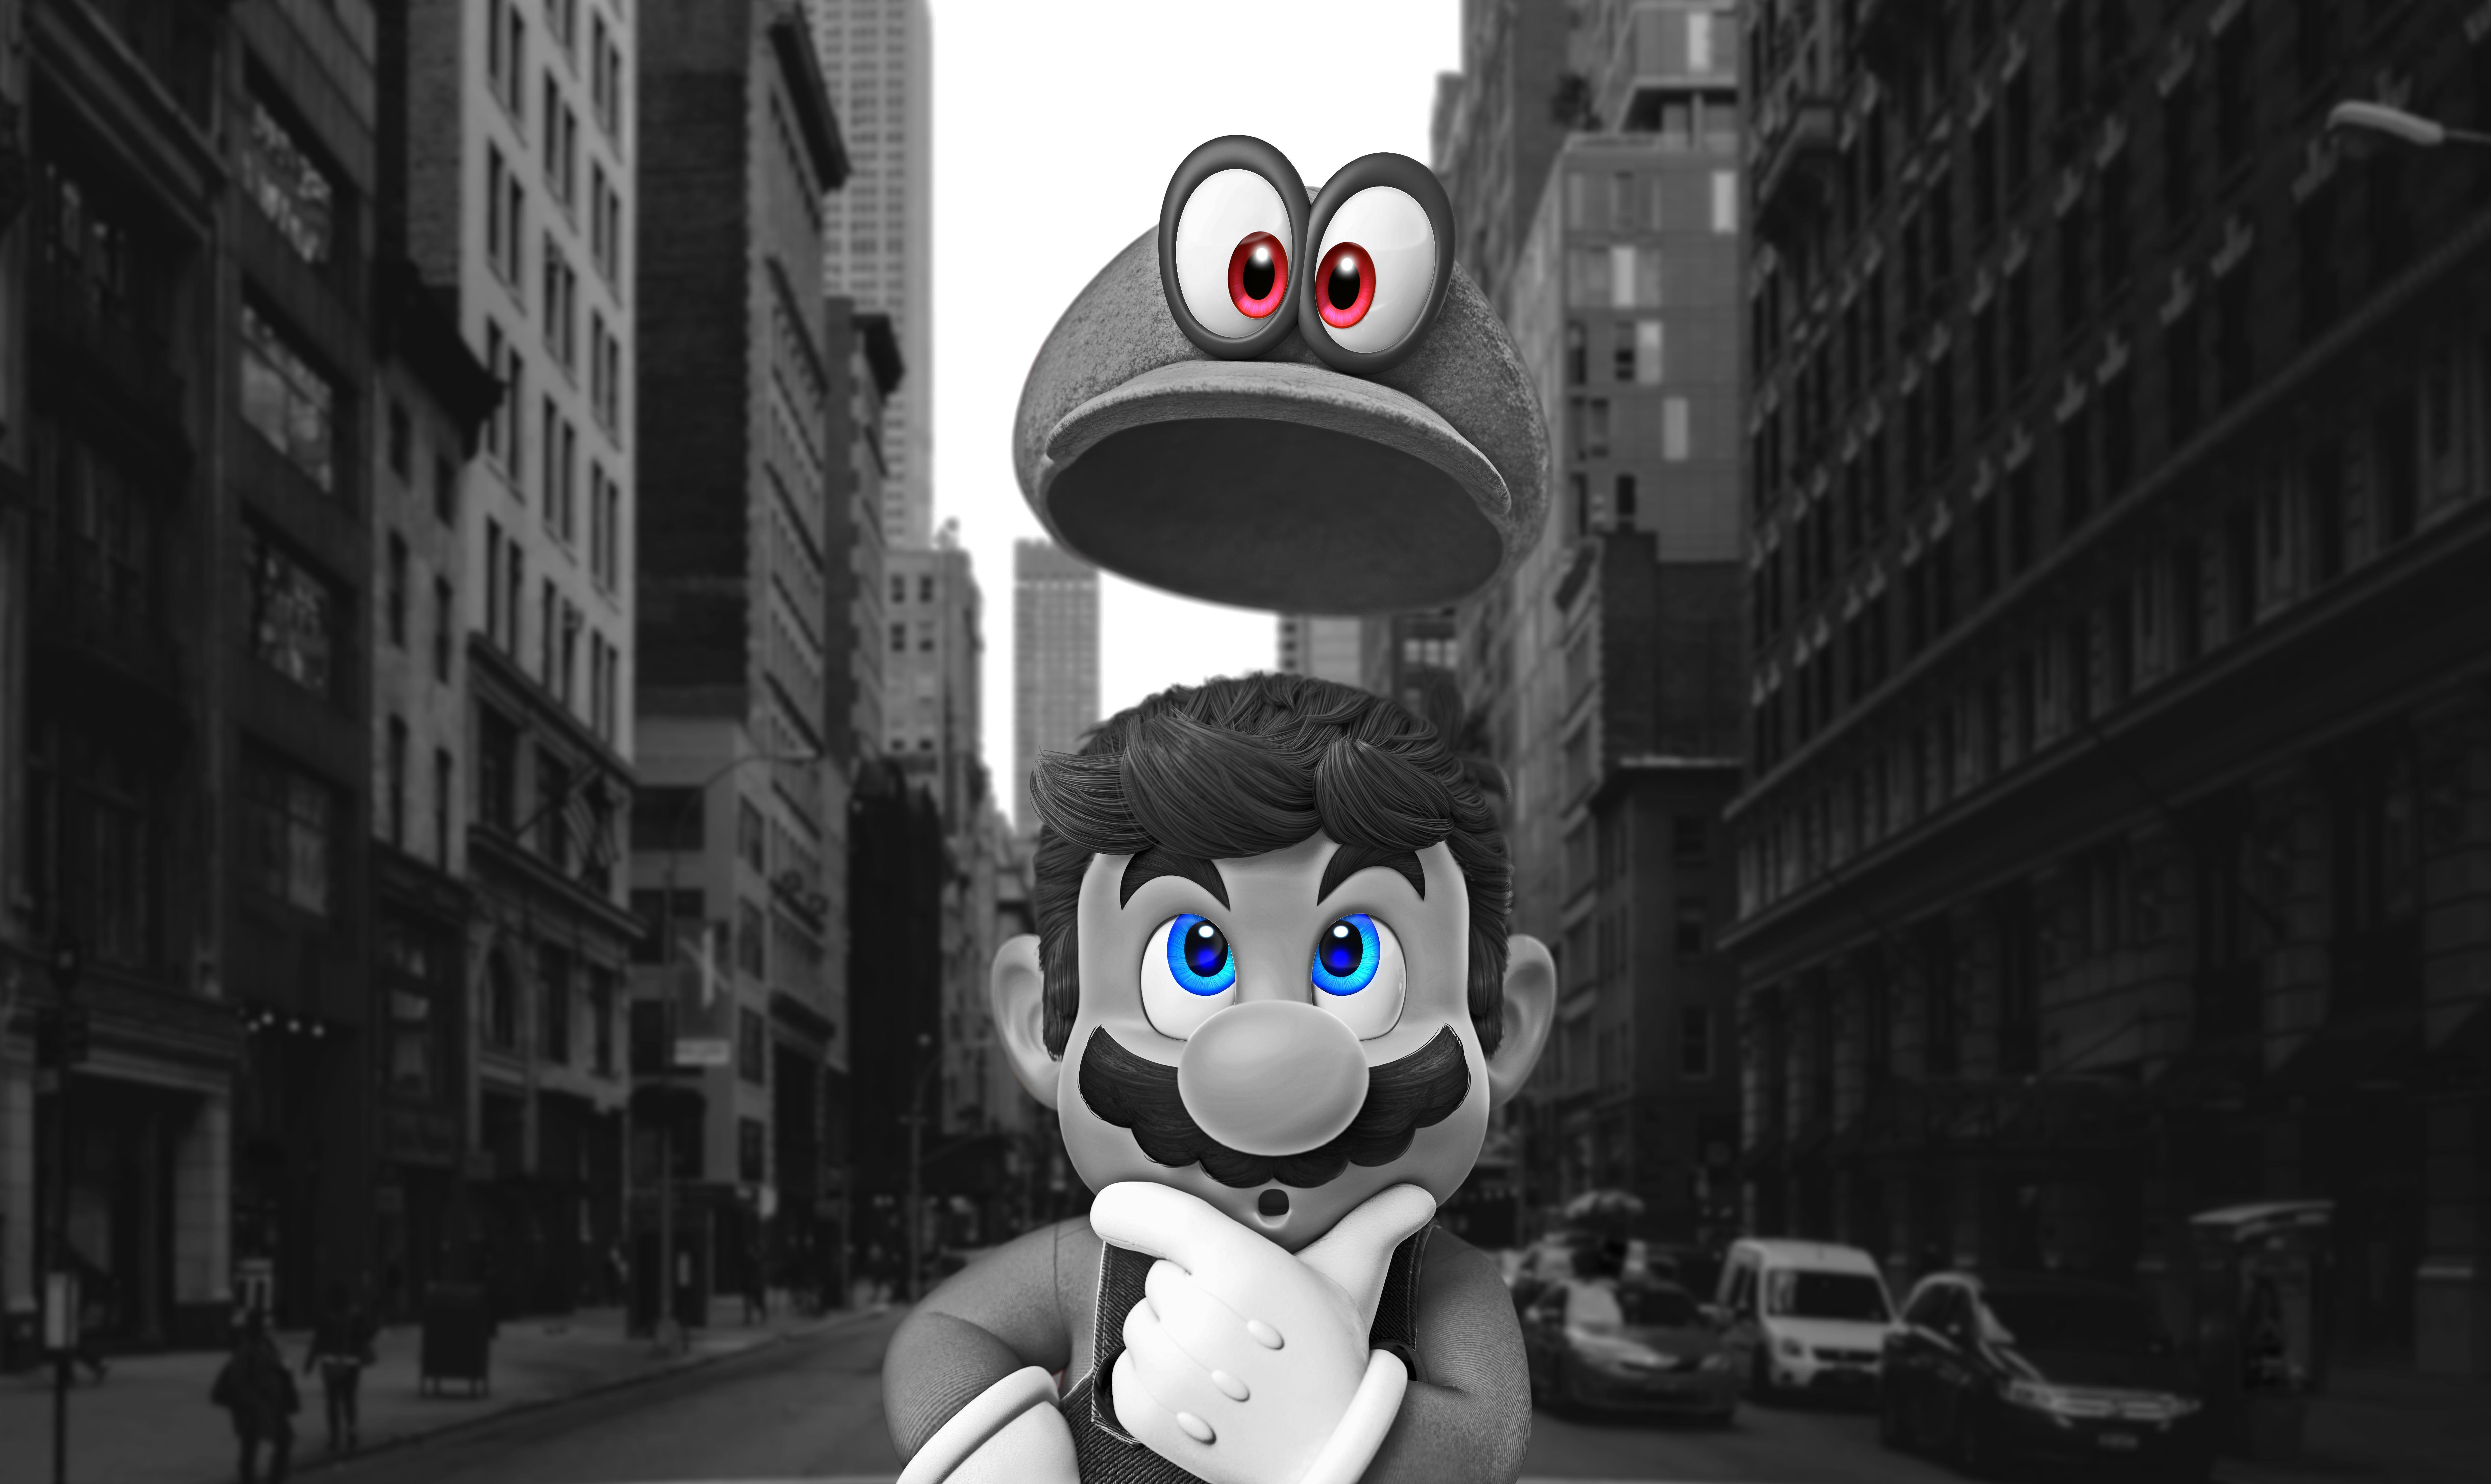 Saw Mario Odyssey and made a few Wallpaper